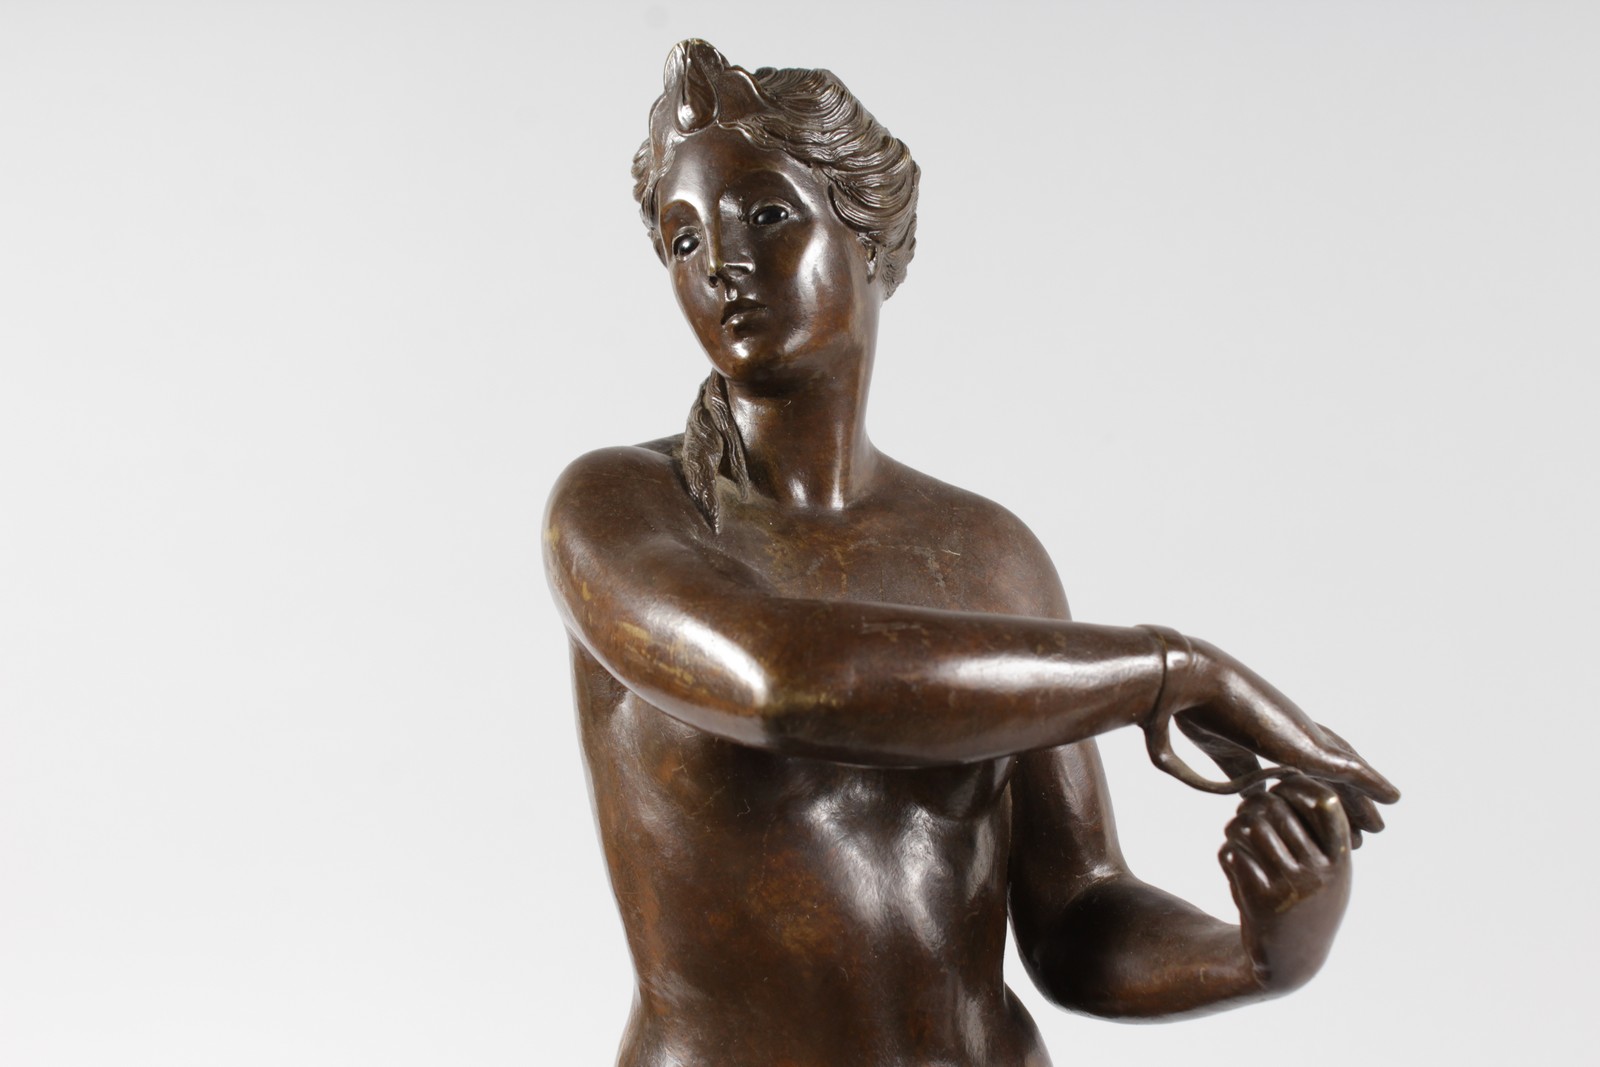 MAYA SERGER VAN PANHUYS A BRONZE STANDING FEMALE NUDE on a circular base. Signed and dated 1925. - Image 5 of 5